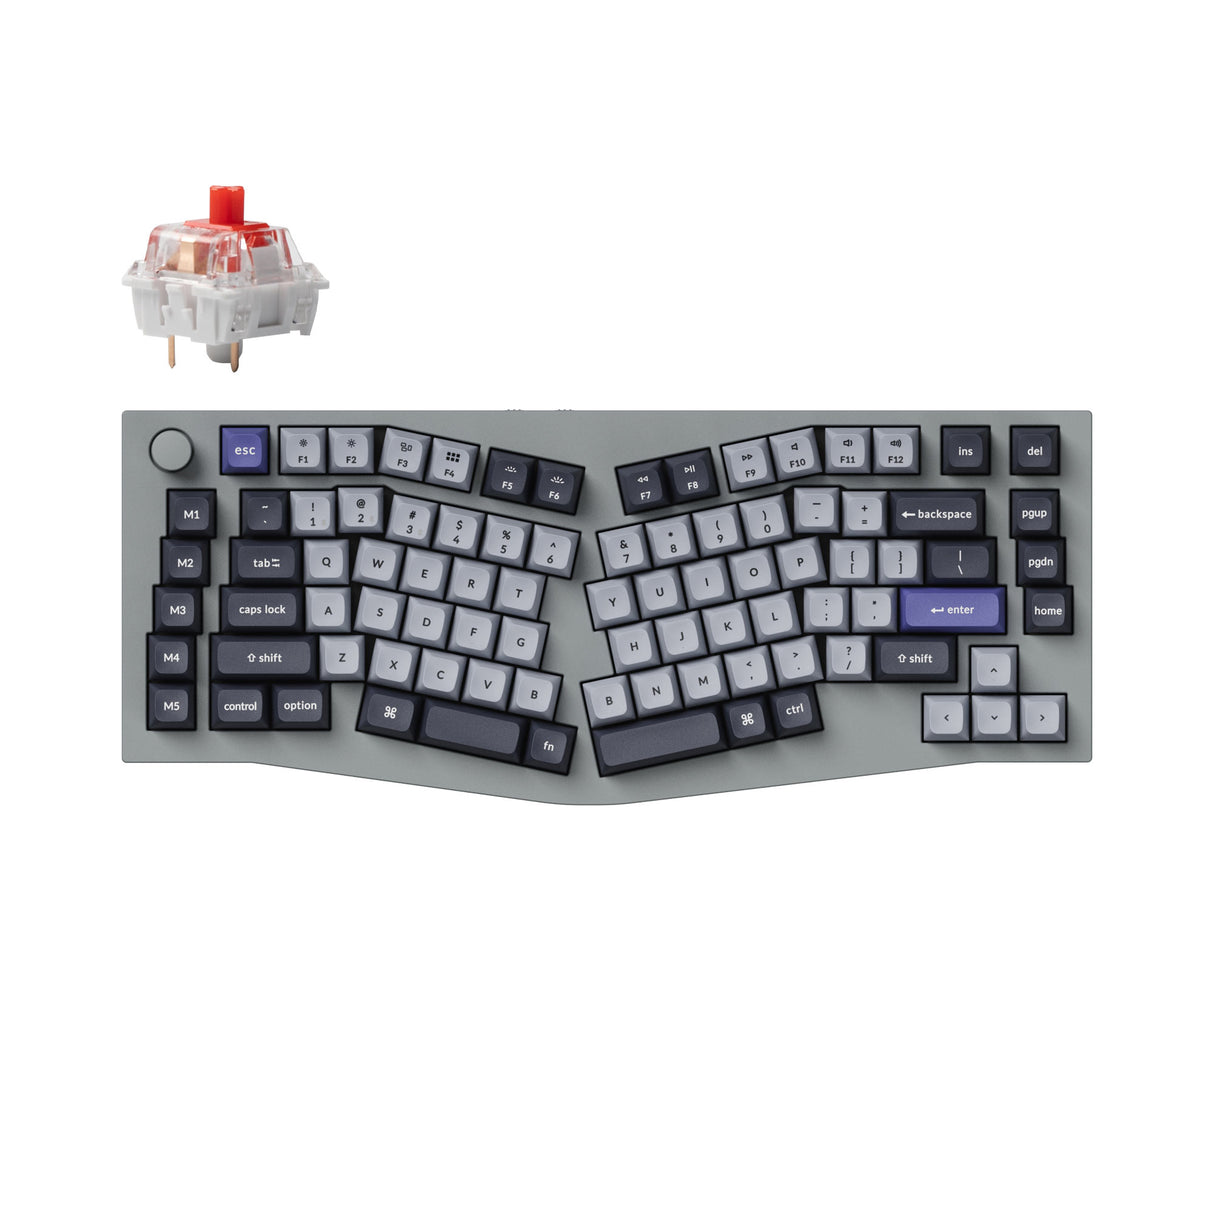 Keychron Q10 Pro QMK/VIA wireless custom mechanical keyboard 75 percent Alice layout full aluminum grey frame for Mac Windows Linux with RGB backlight hot-swappable K Pro red